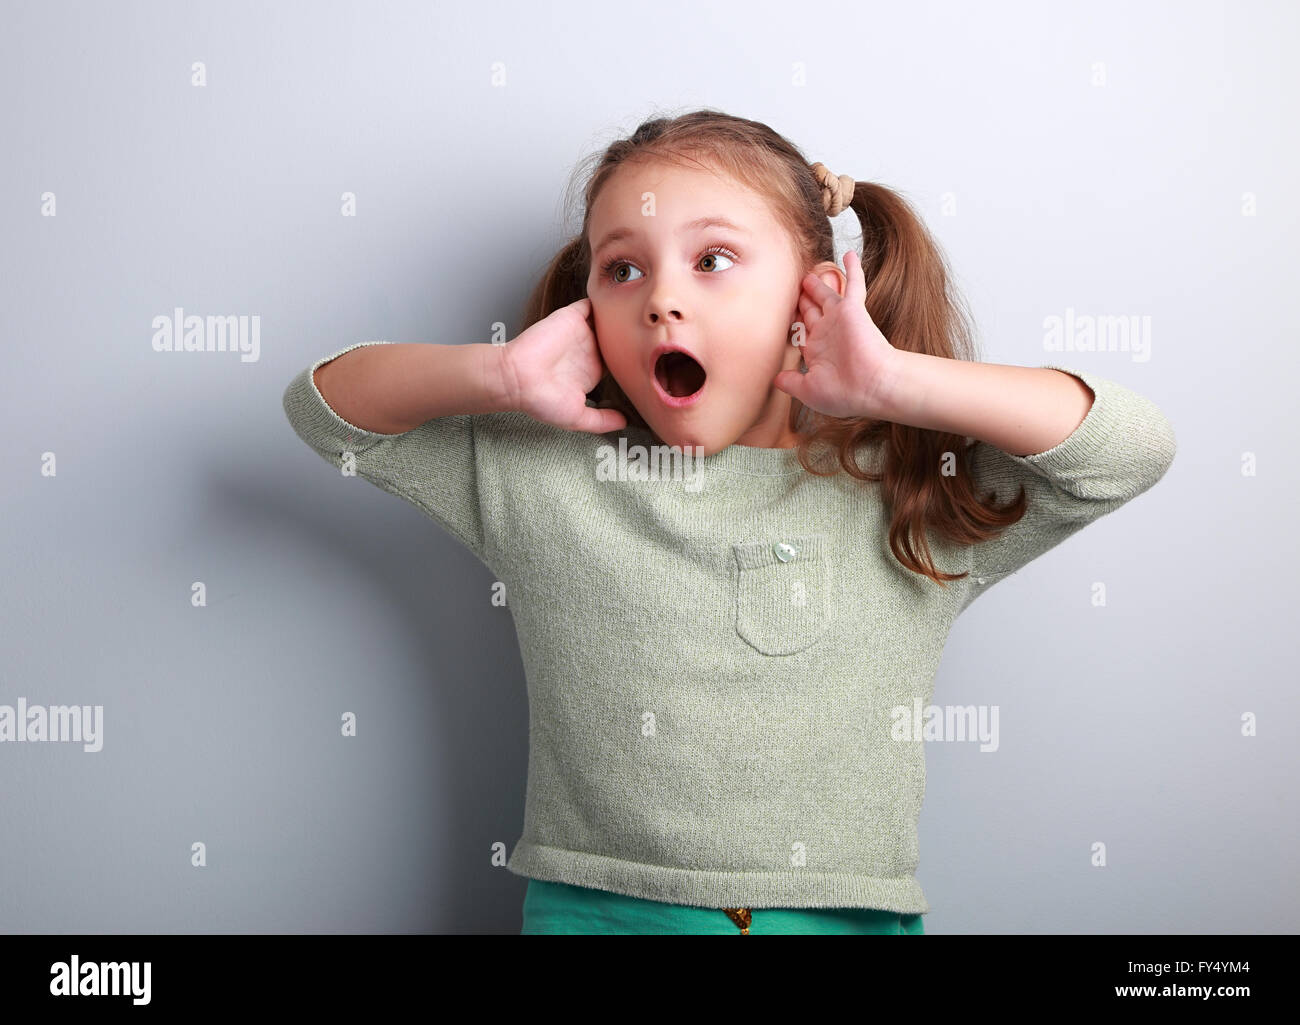 Surprising kid girl with opened mouth and hand near face looking on blue copy space background Stock Photo